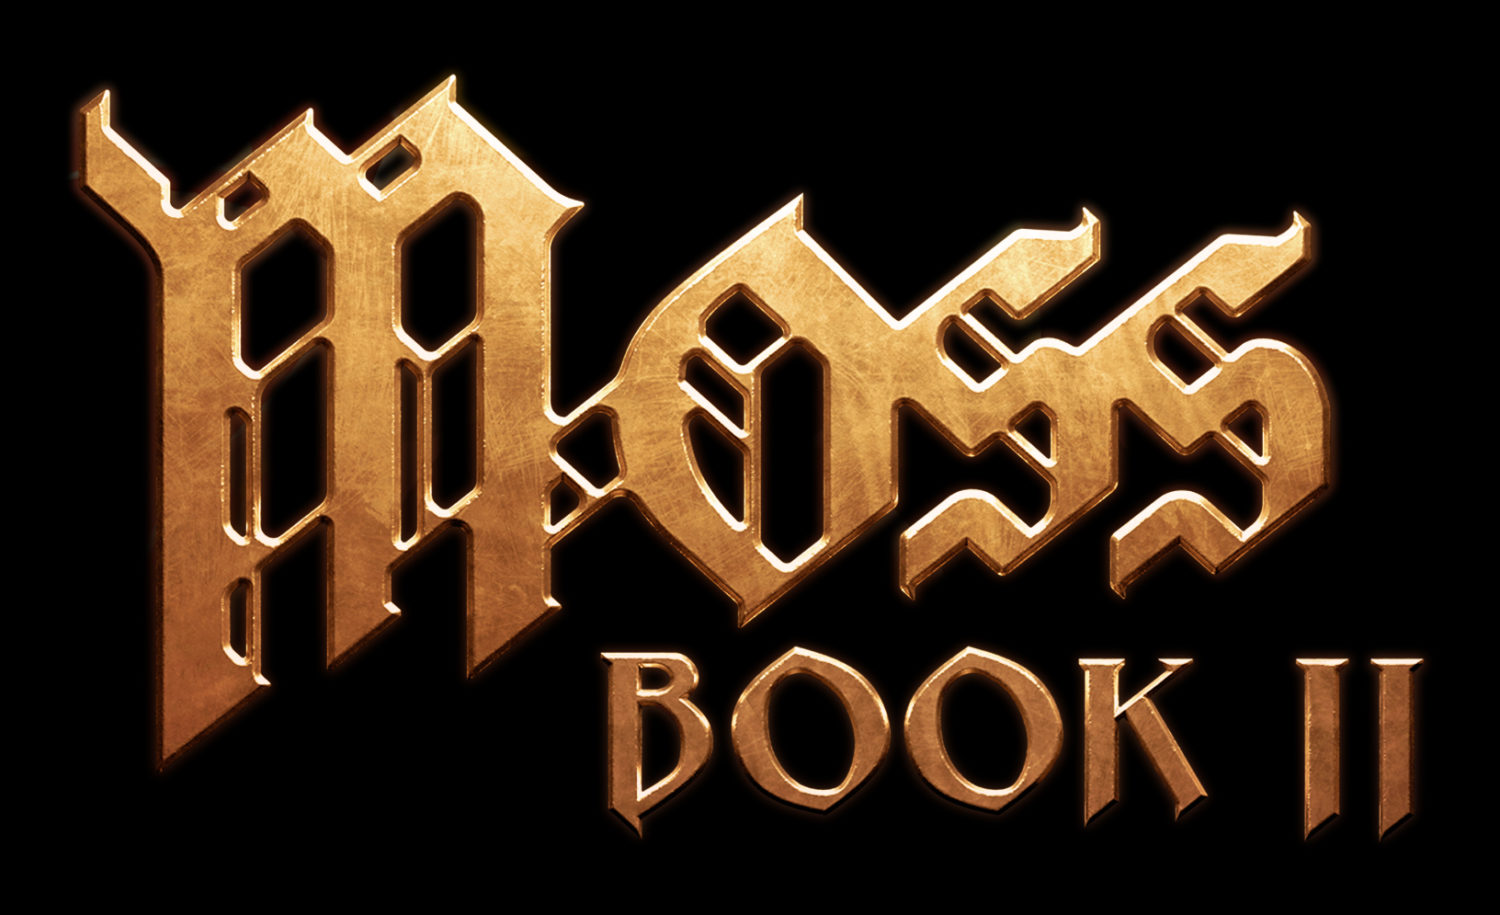 moss book 2 review